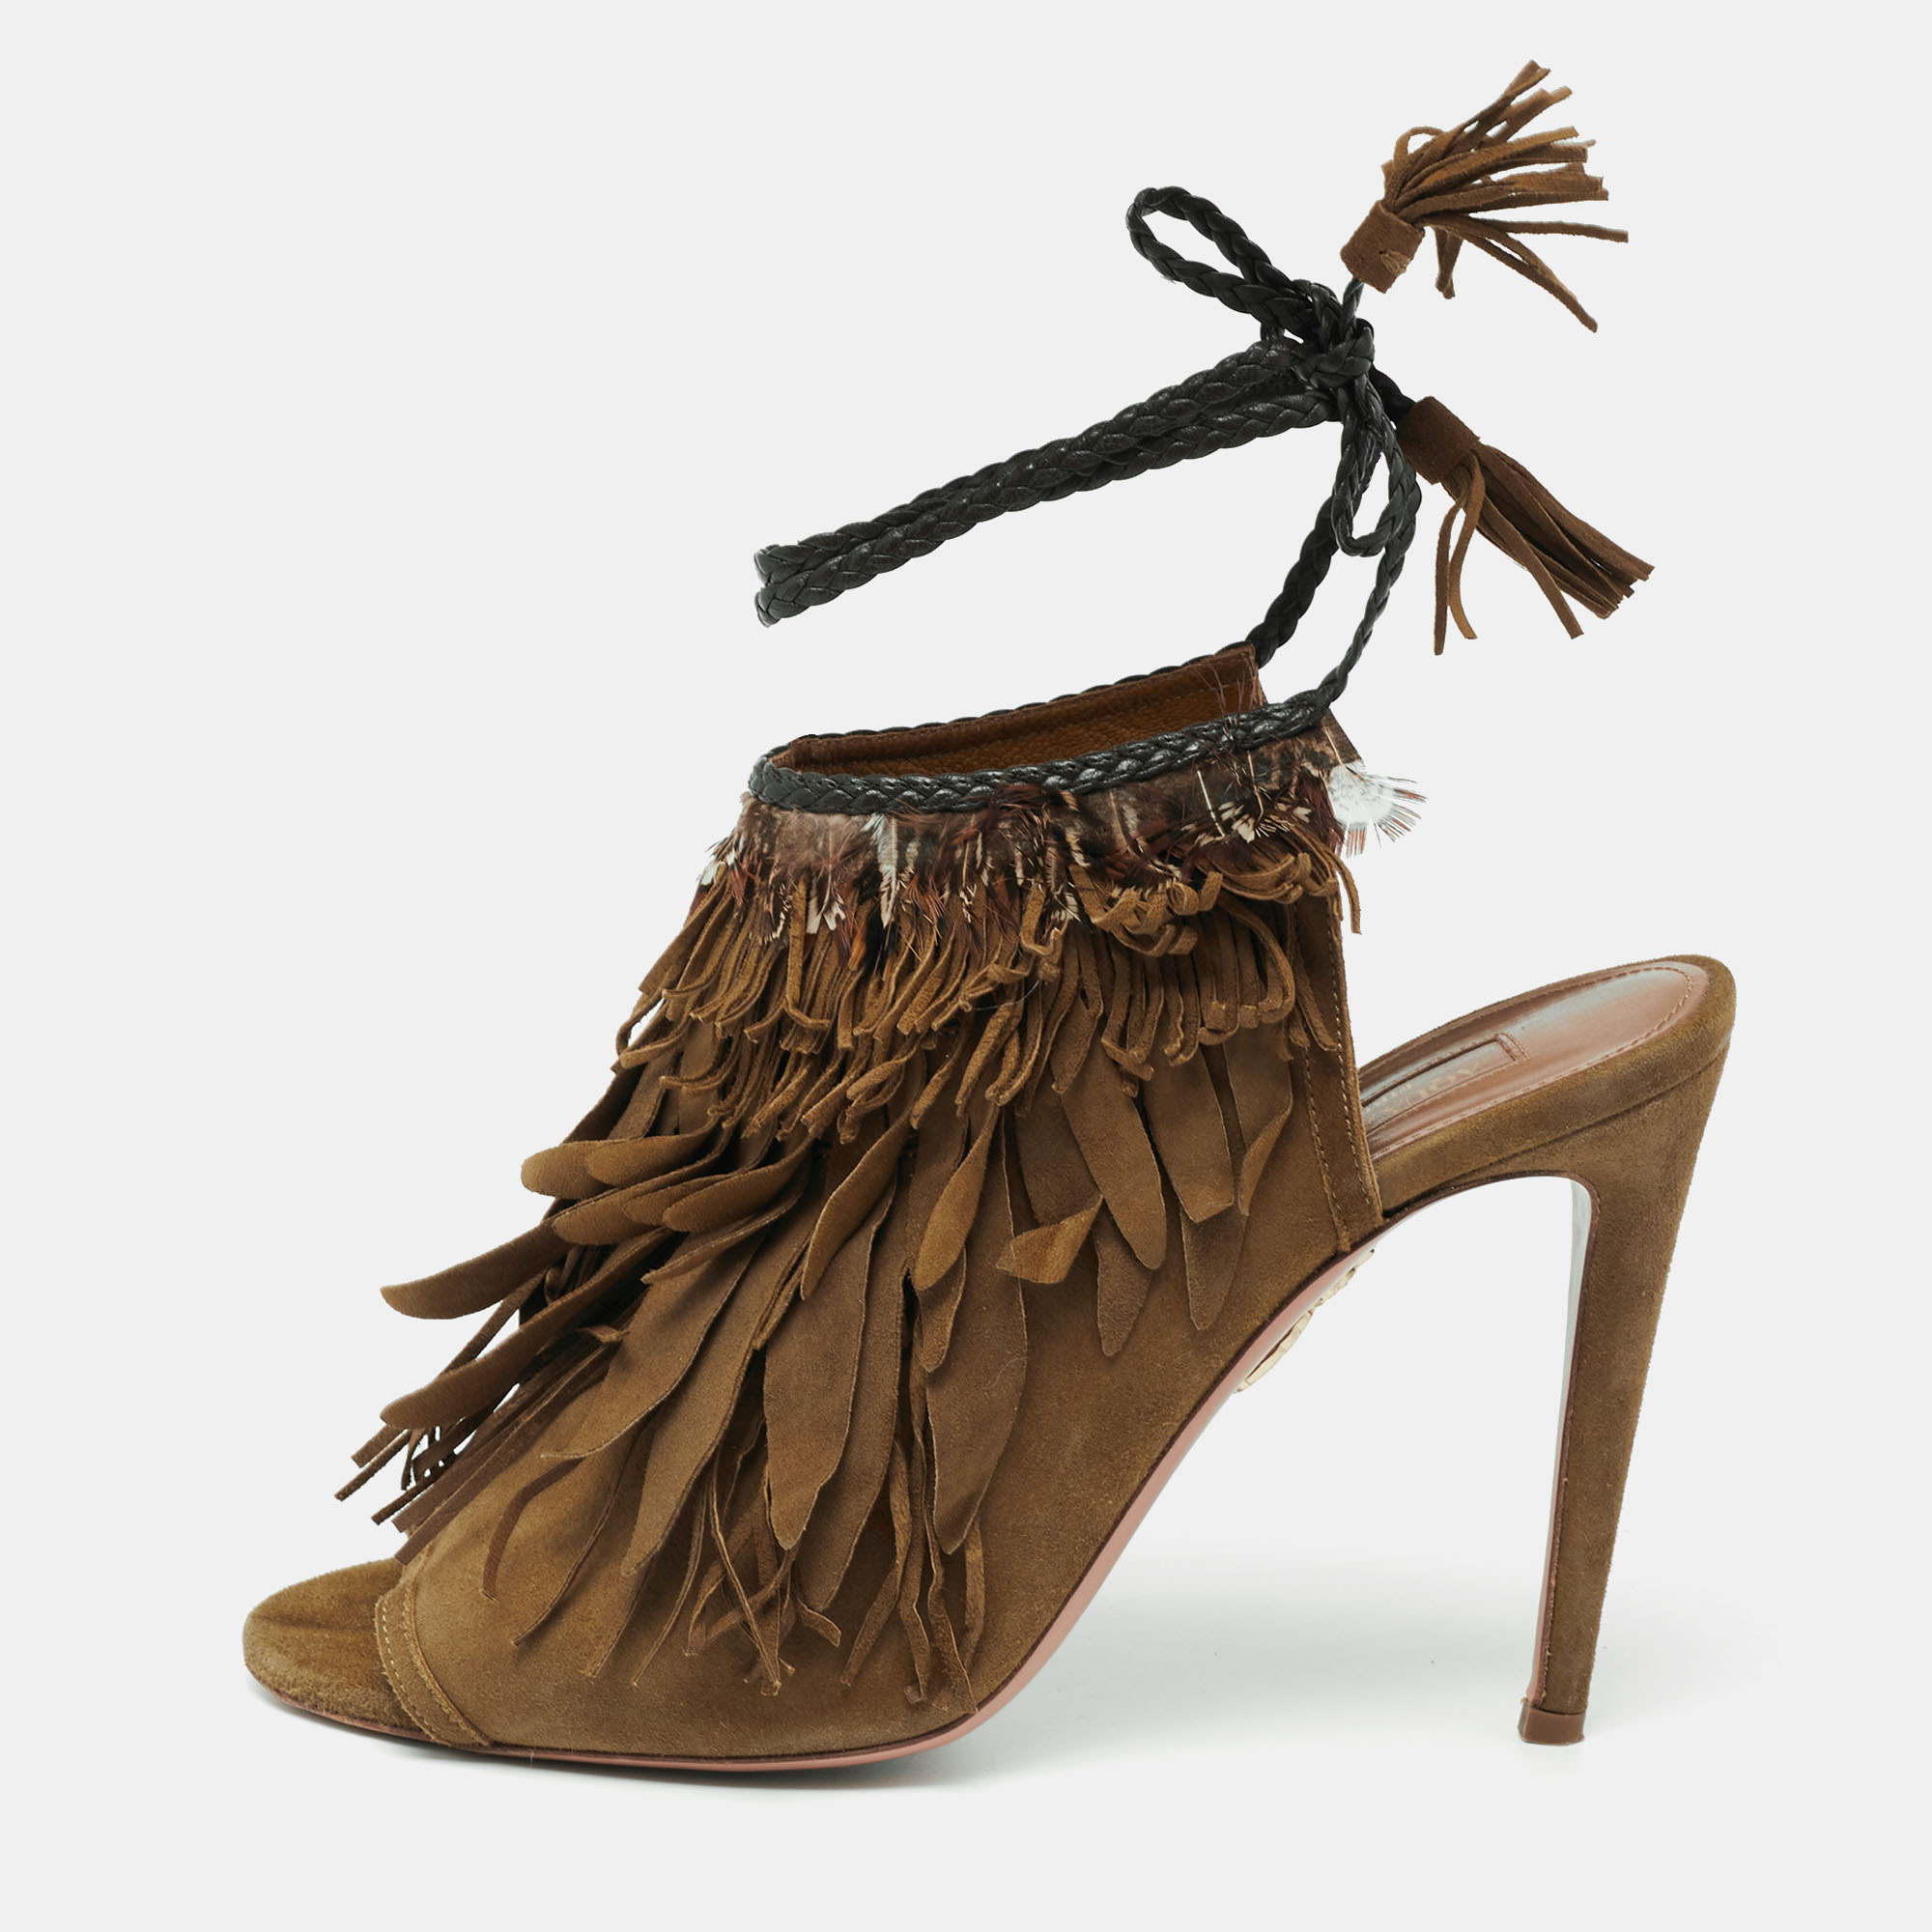 Aquazzura Olive Green  Suede Tassel Ankle Tie Sandals Size 39